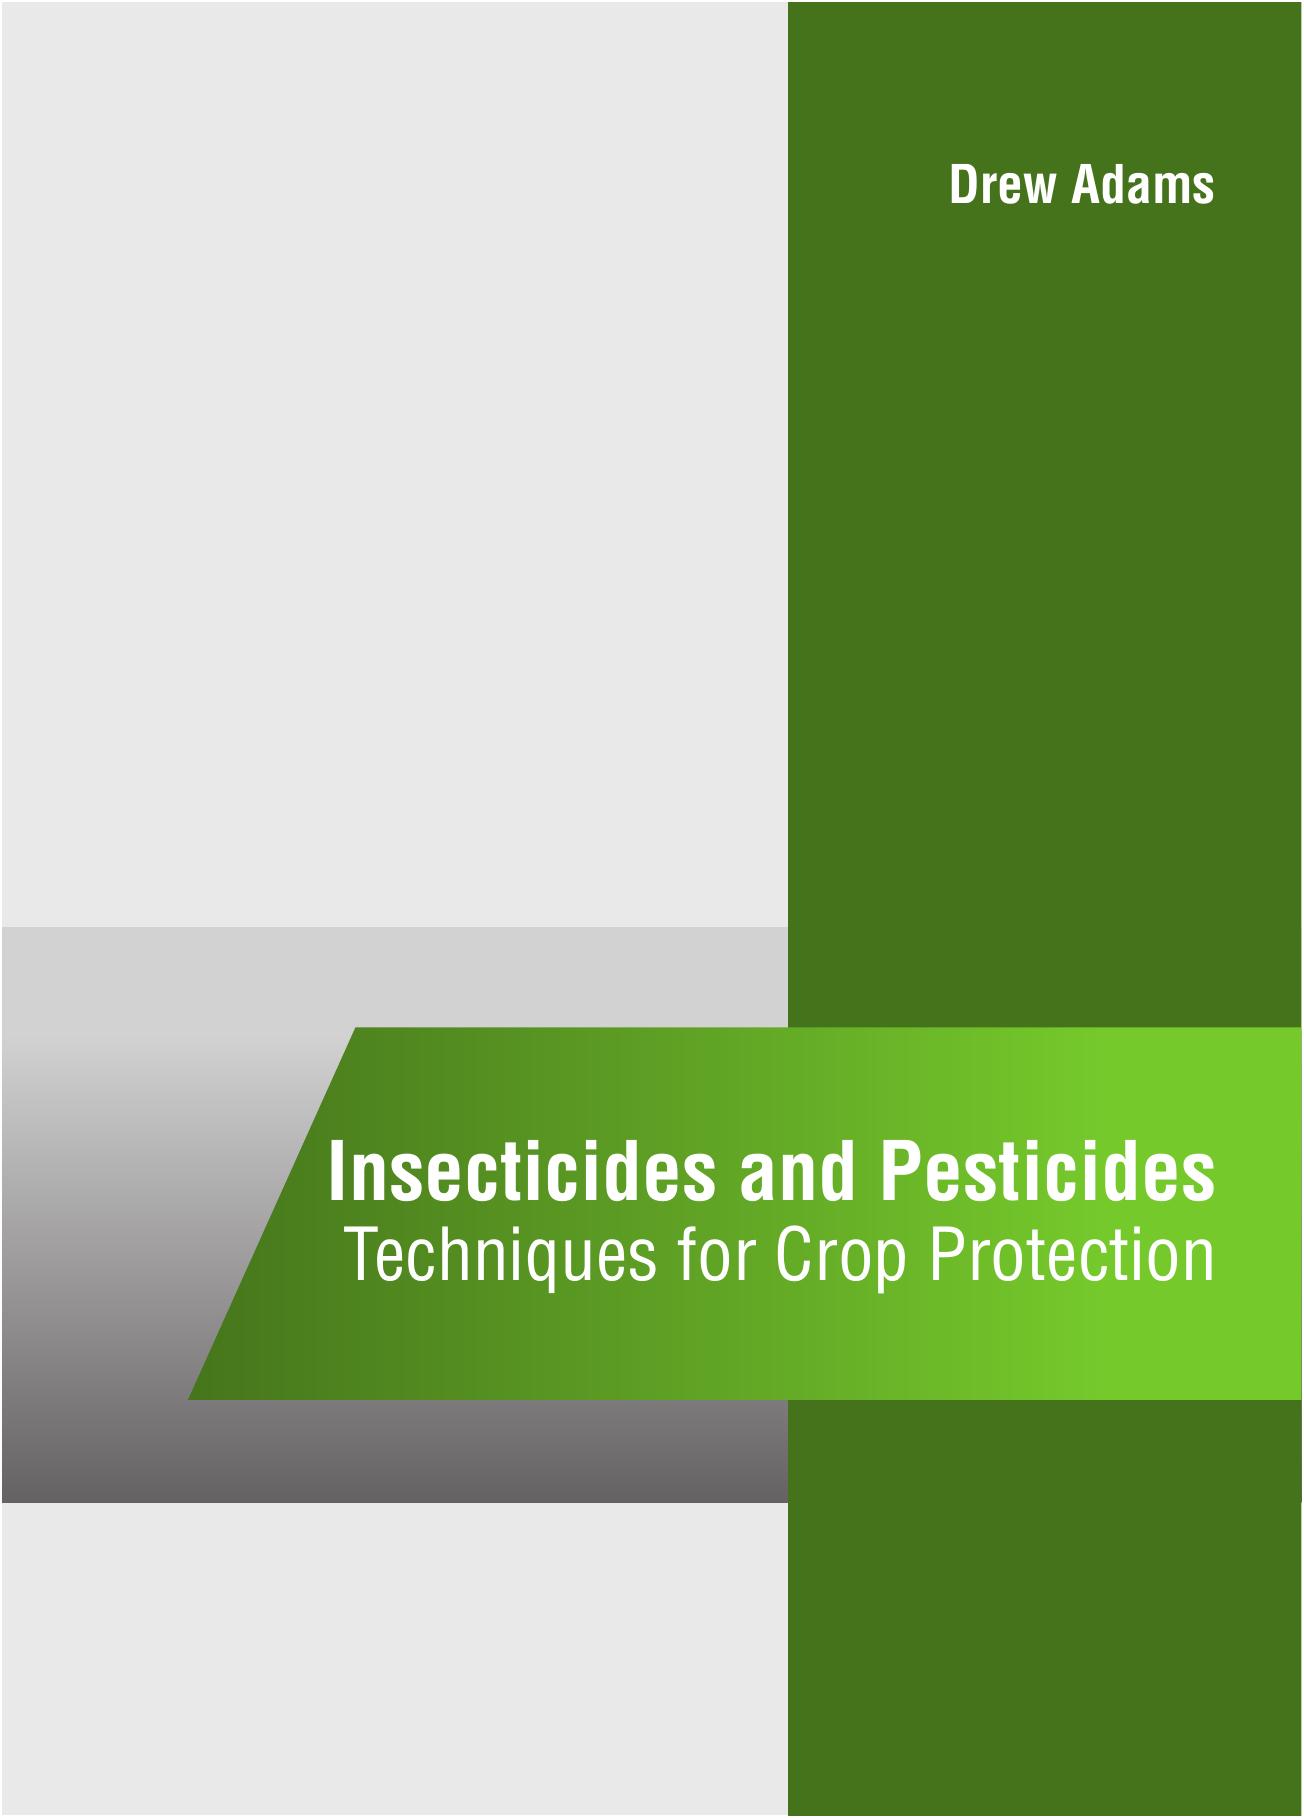 Insecticides and Pesticides 2016